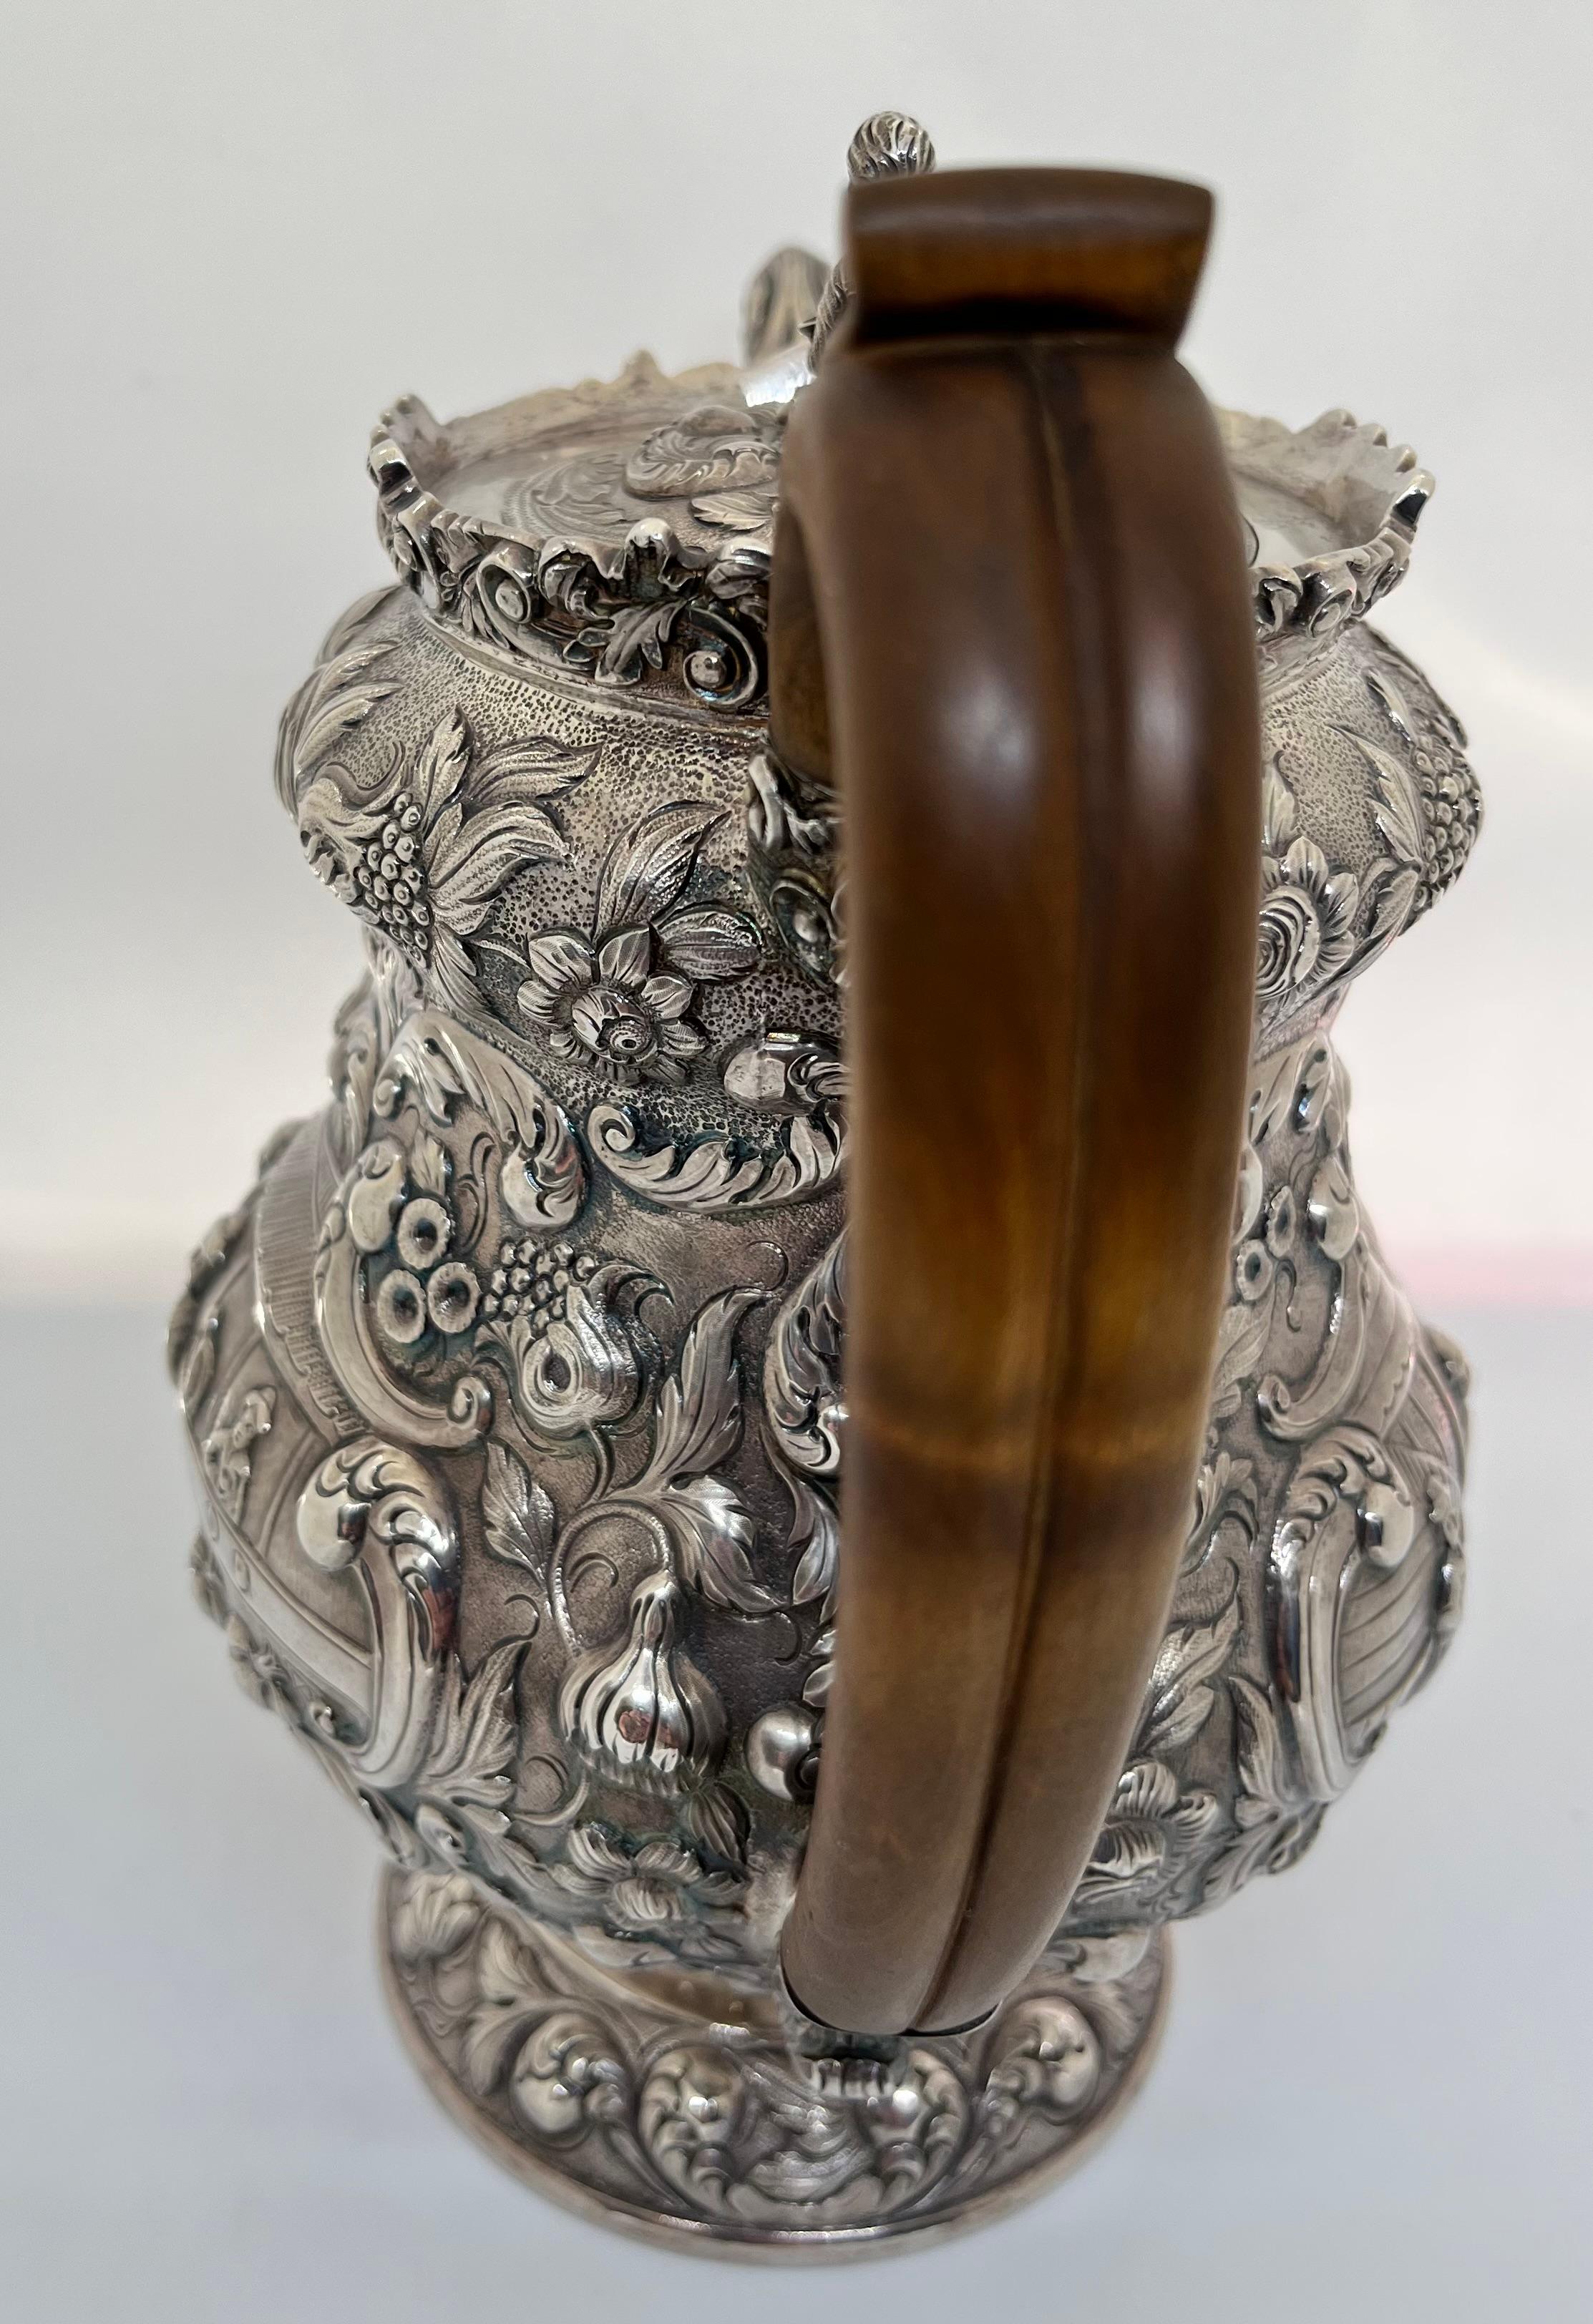 Regency George IV Silver Tea or Coffee Pot Decorated with the Chinese Tea Harvest